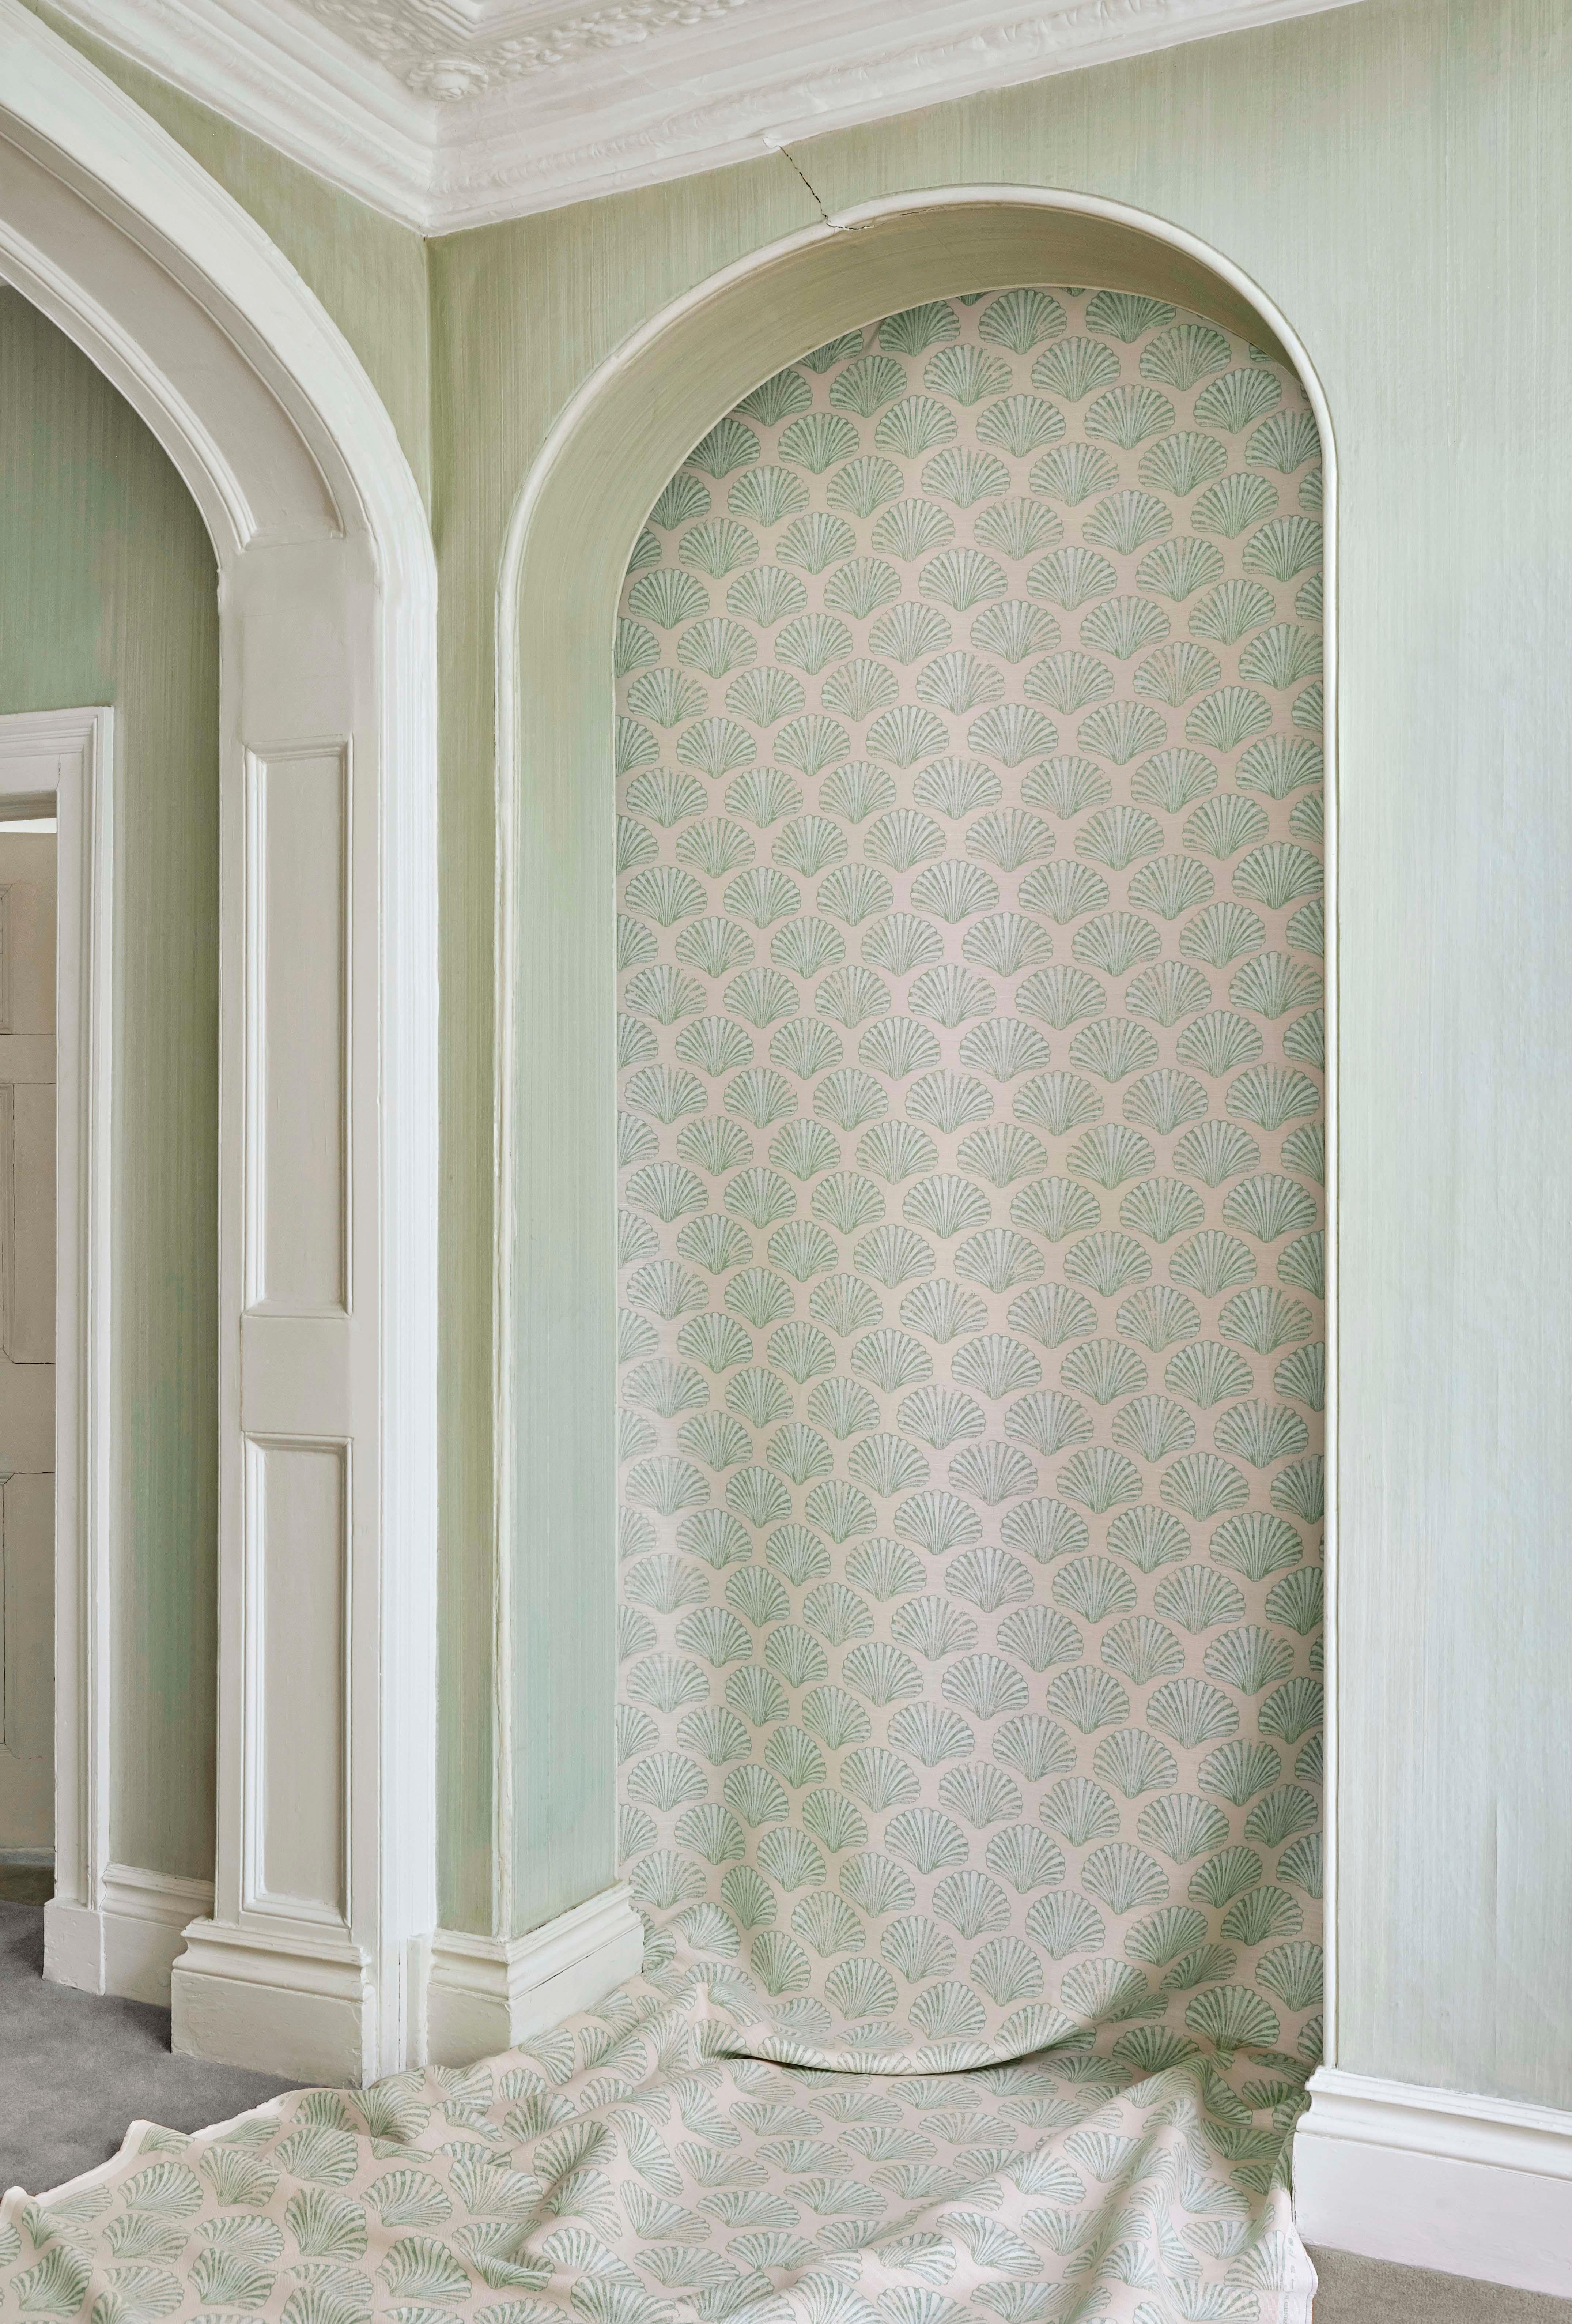 'Scallop Shell' Contemporary, Traditional Fabric in Plaster/Green In New Condition For Sale In Pewsey, Wiltshire